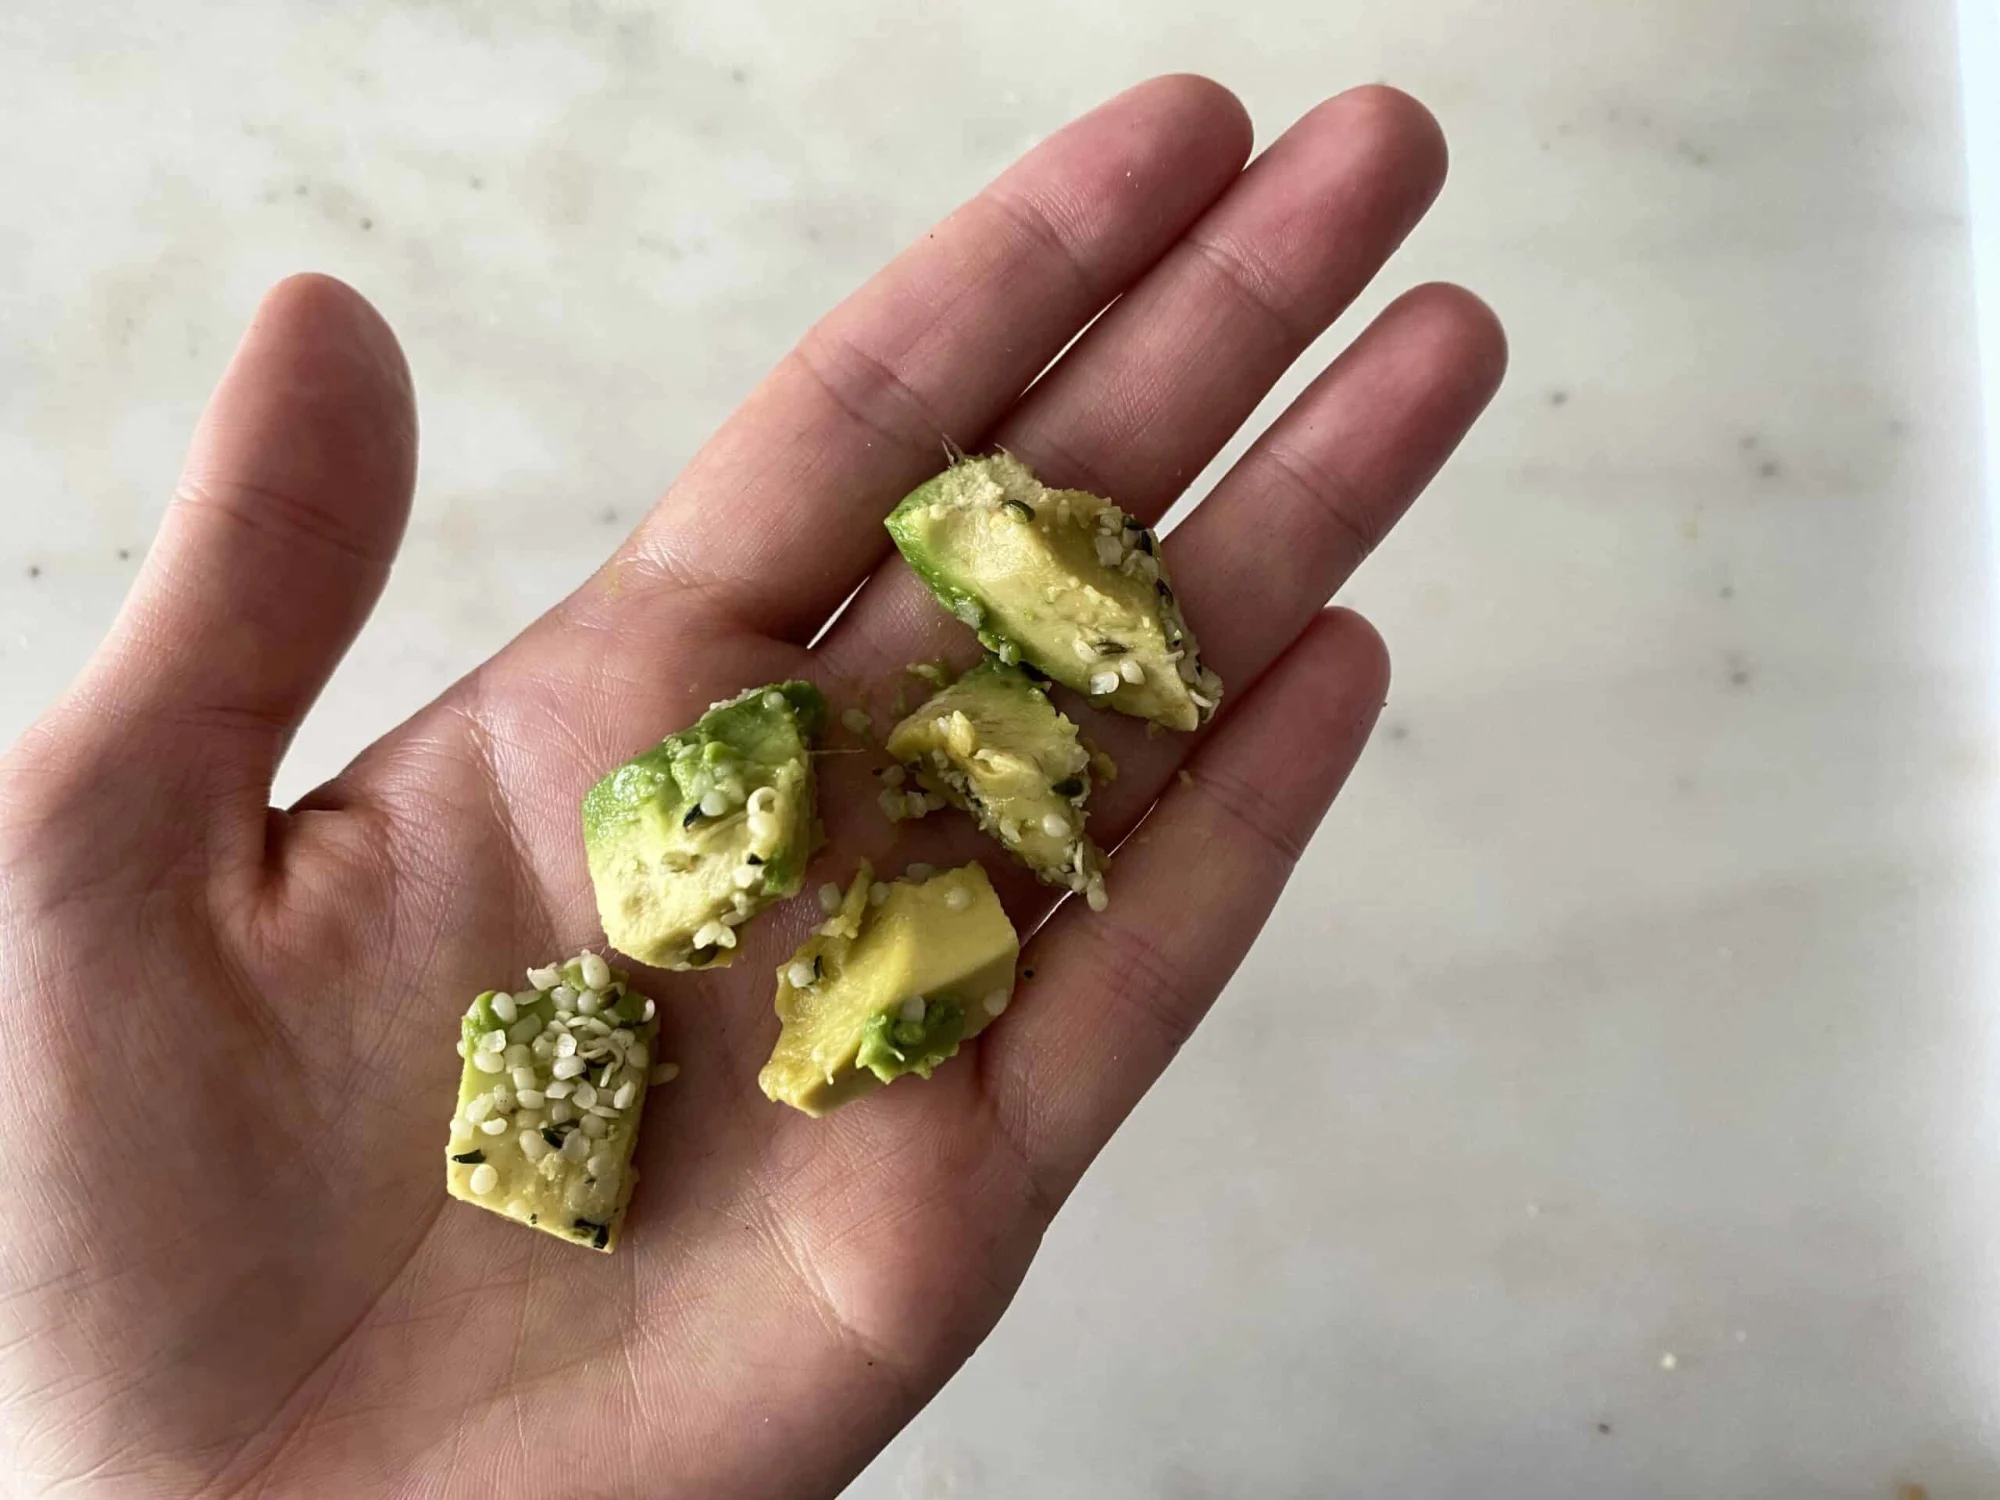 hand holding pieces of avocado with hemp seed on them